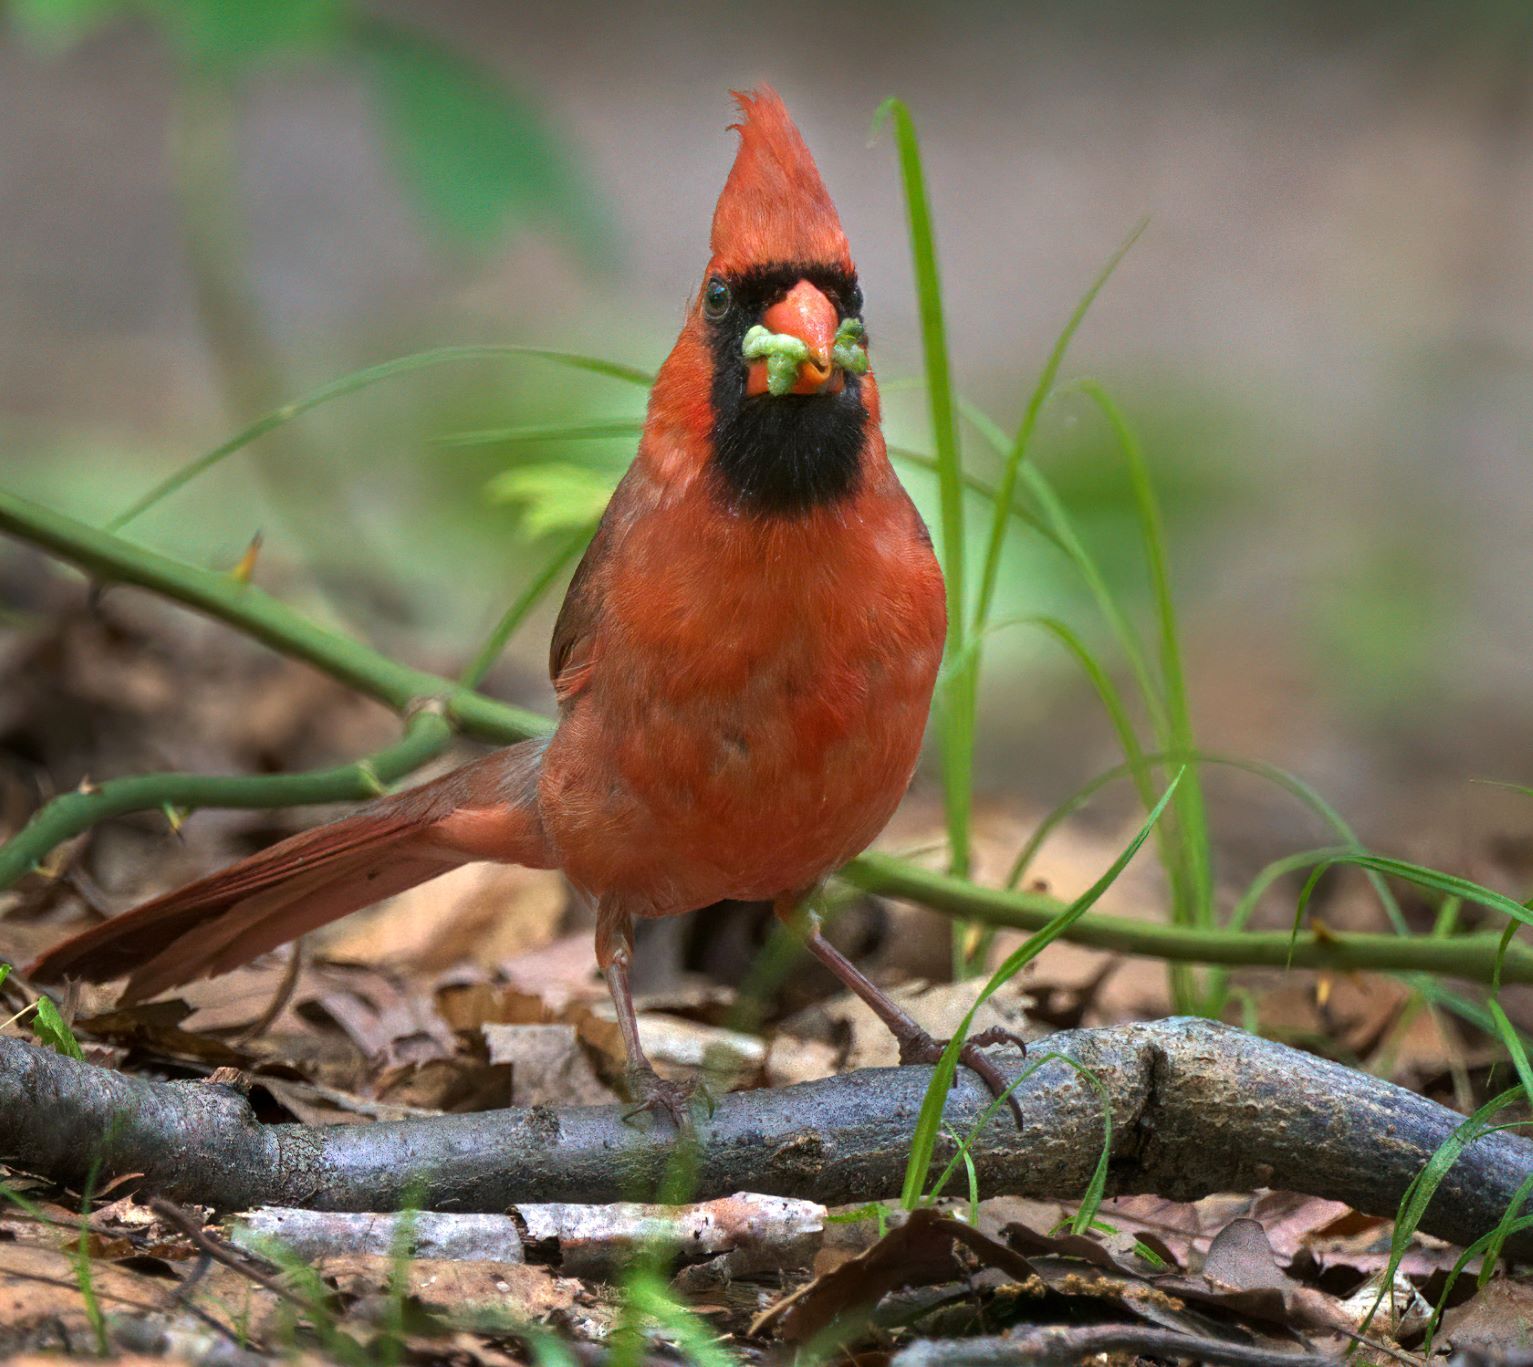 A male Northern Cardinal collects a billful of caterpillars to feed its young. Photo: Roger Friedman, DMP